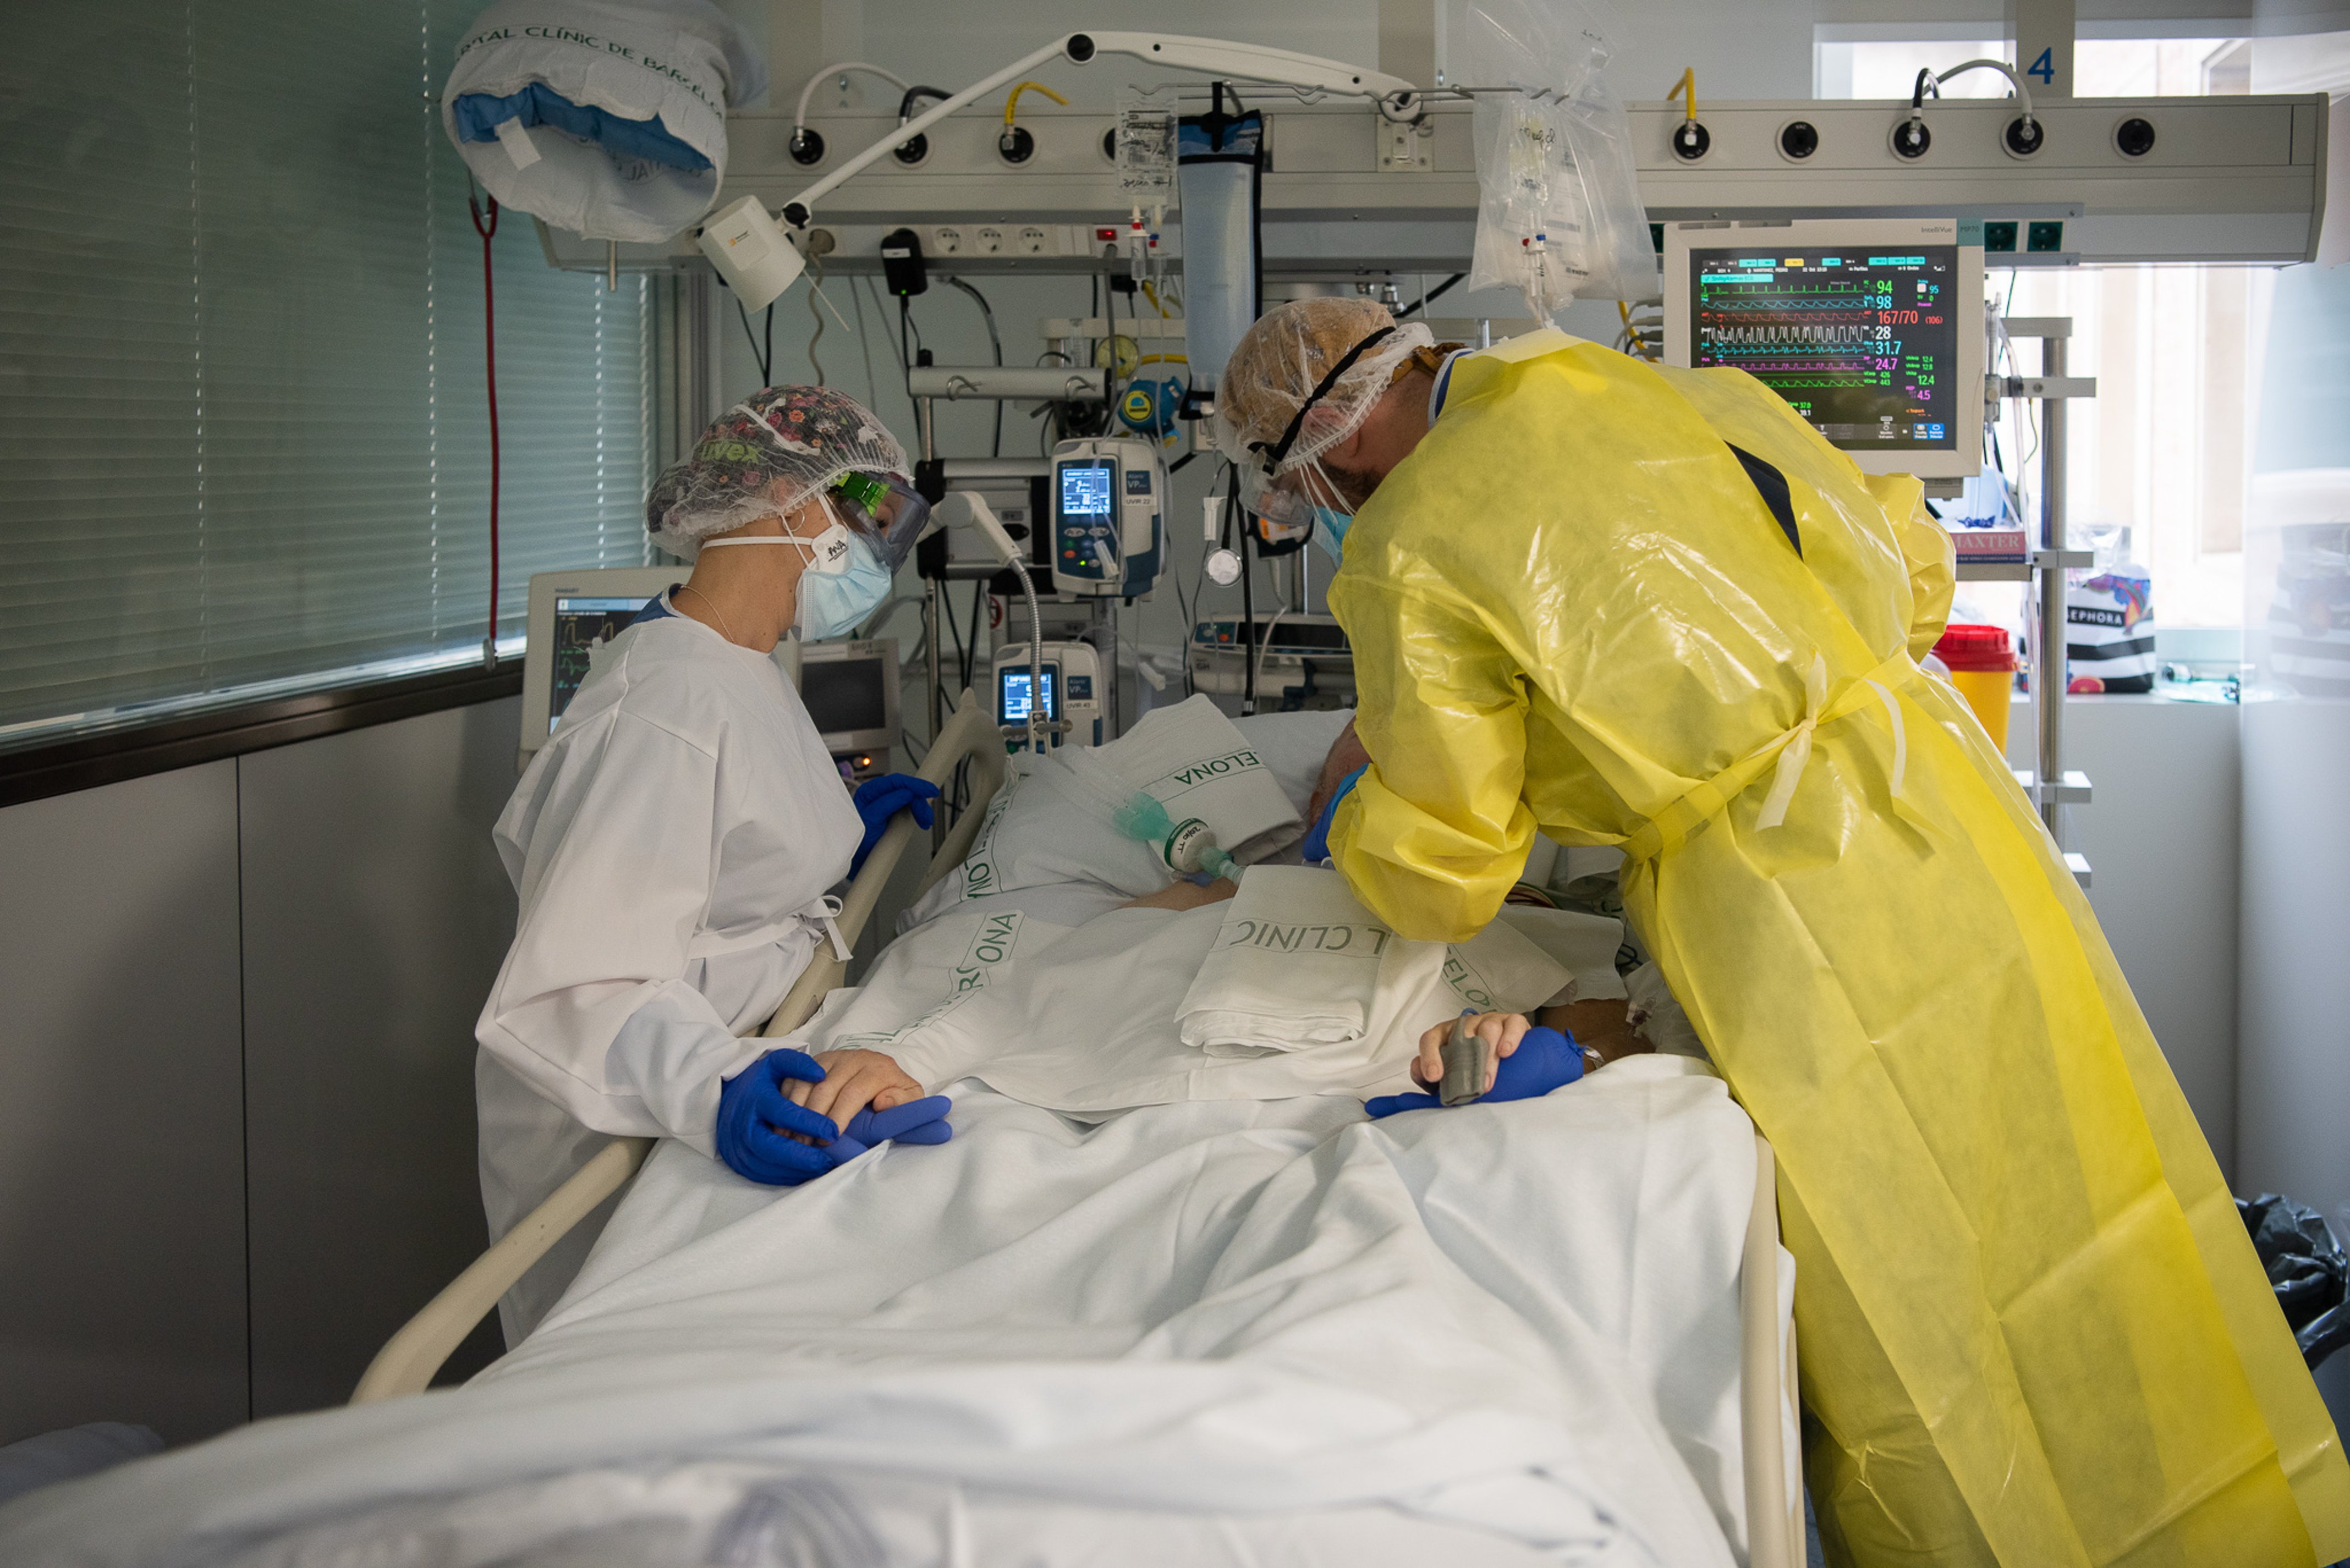 Covid-19 patients now occupy 52% of intensive care beds in Catalonia